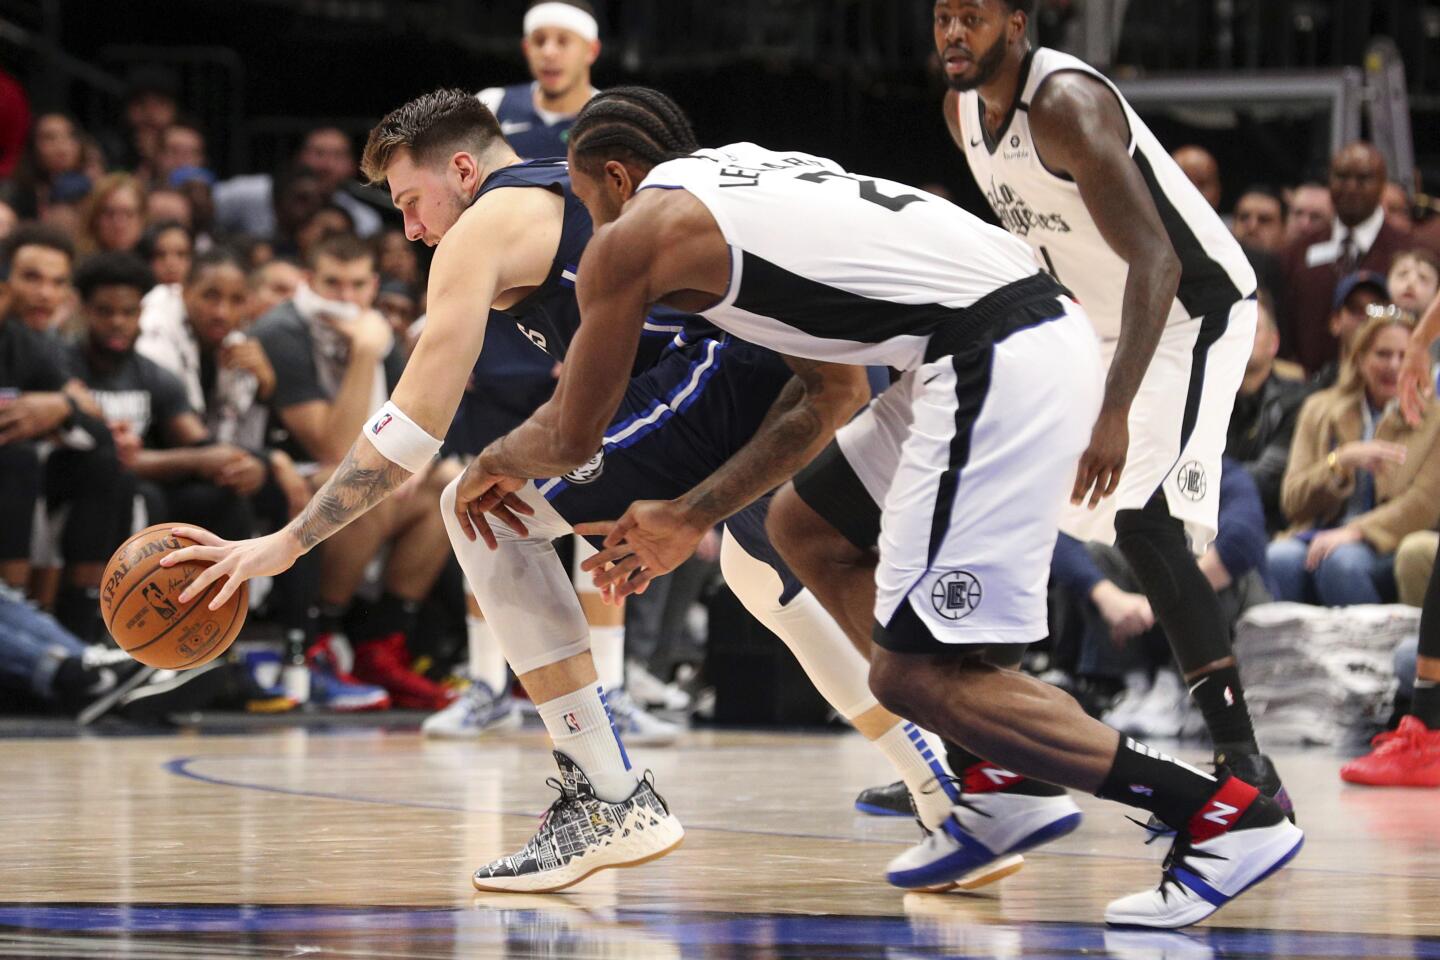 Luka Doncic and Kawhi Leonard chase a loose ball during the second half of a game Jan. 21.